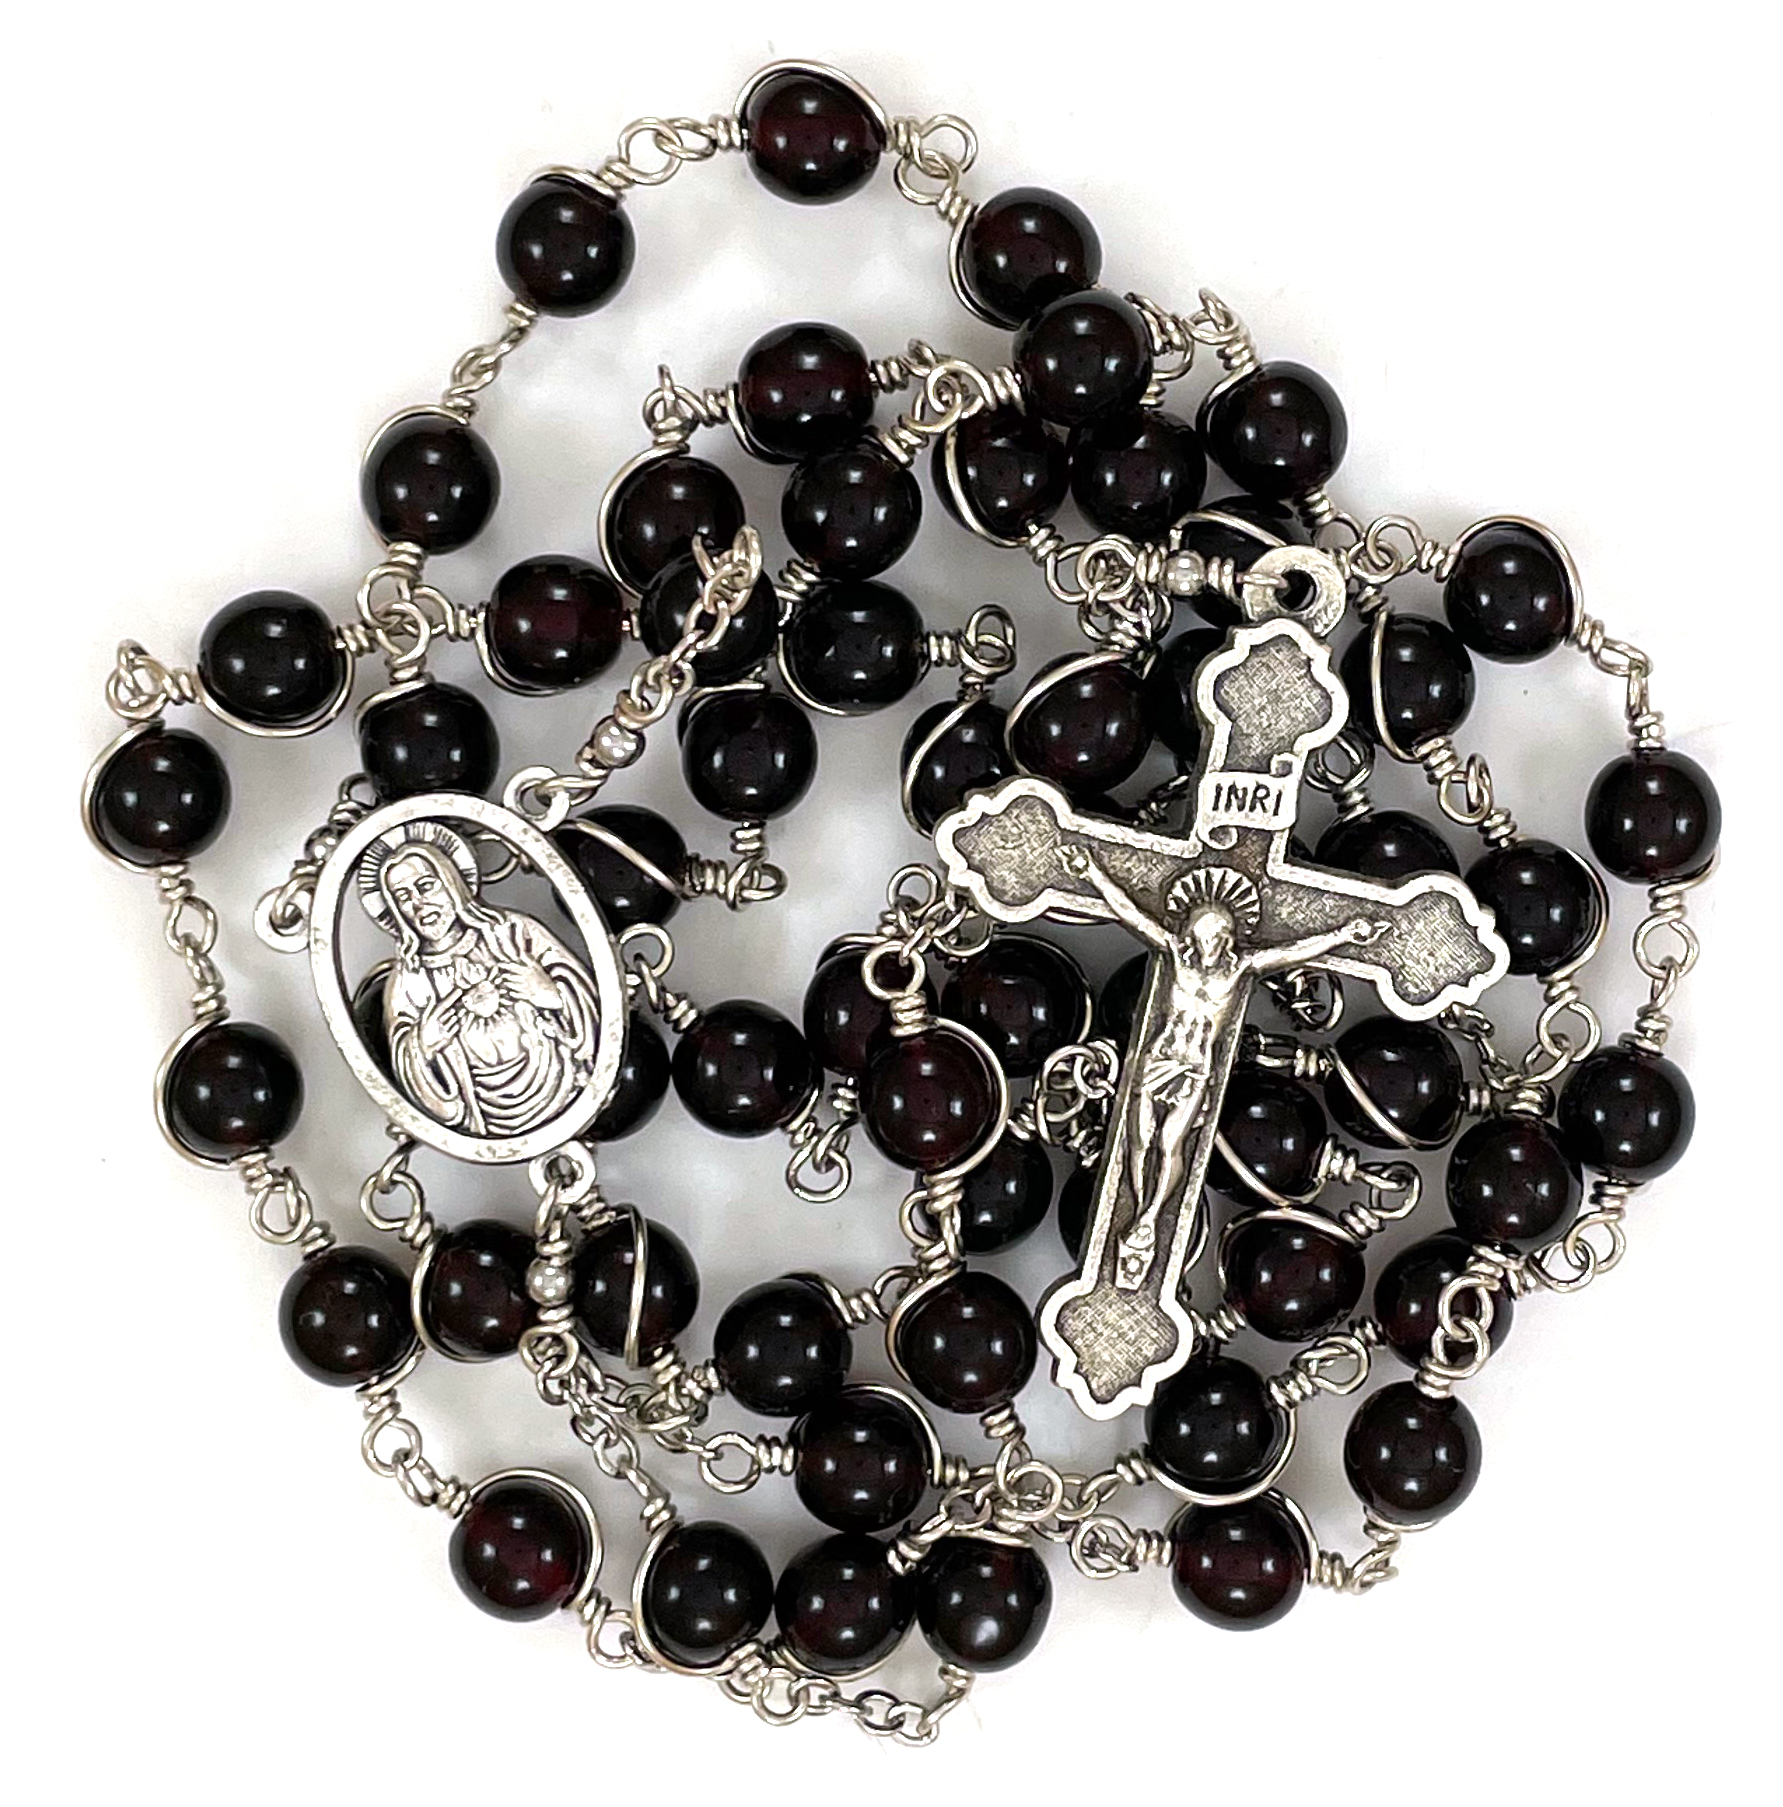 Cage-Wrapped Garnet Red Rosary ($48.99 CAD)